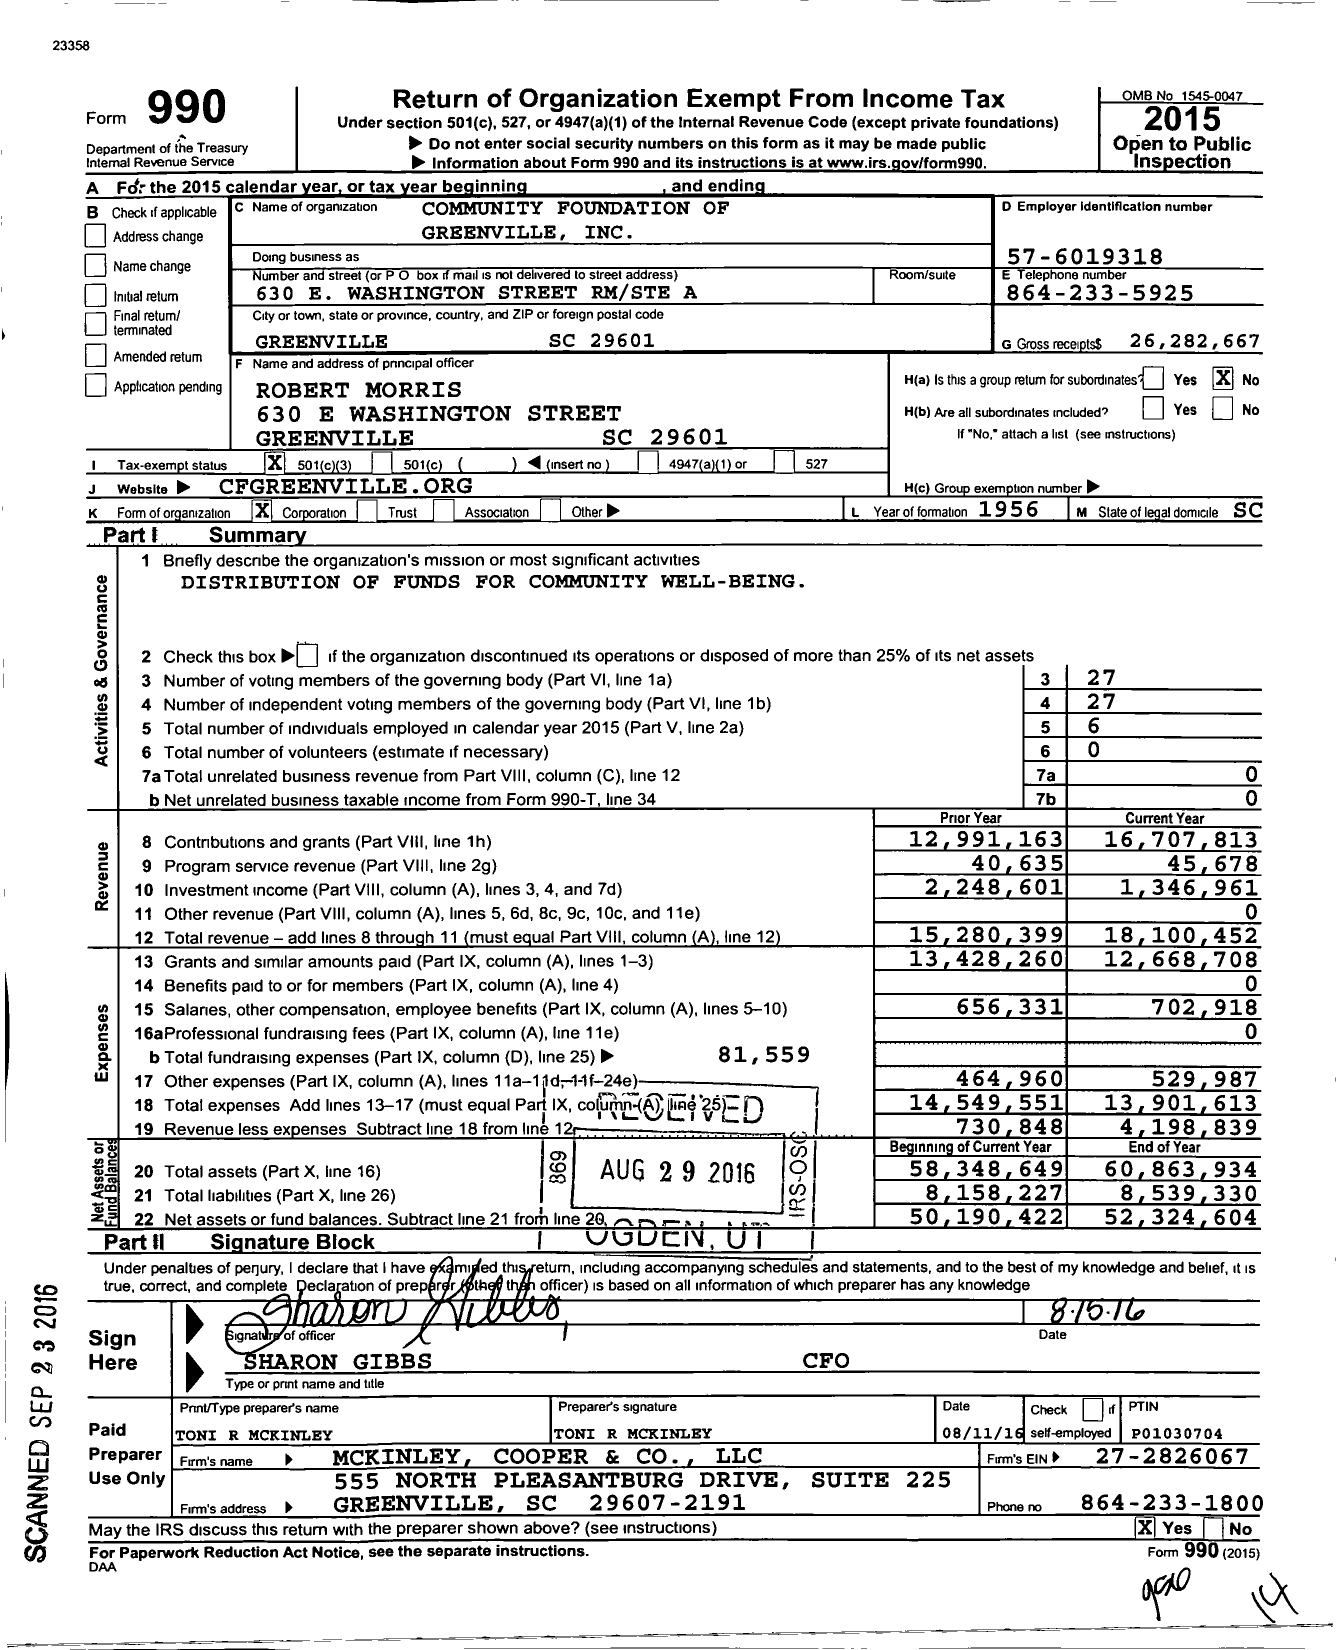 Image of first page of 2015 Form 990 for Community Foundation of Greenville